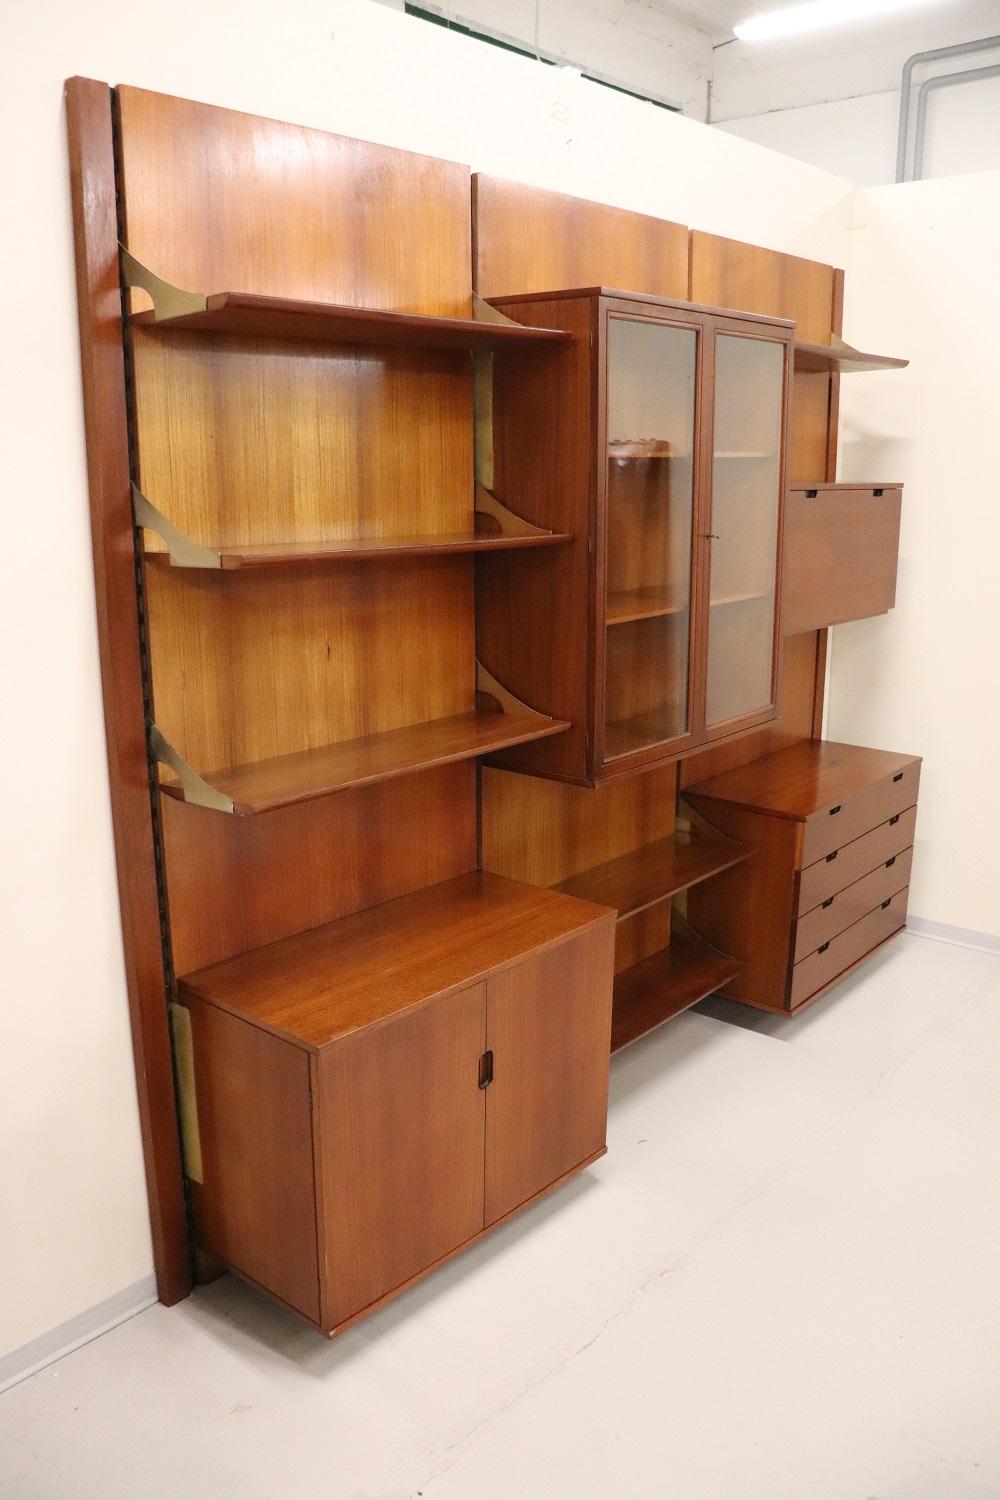 Rare Italian design modular bookcase 1960s by Raffaella Crespi for Mobilia high quality furniture. This Italian design furniture is made of teak wood. Equipped with many shelves and practical drawers. In the central part an elegant showcase. Great